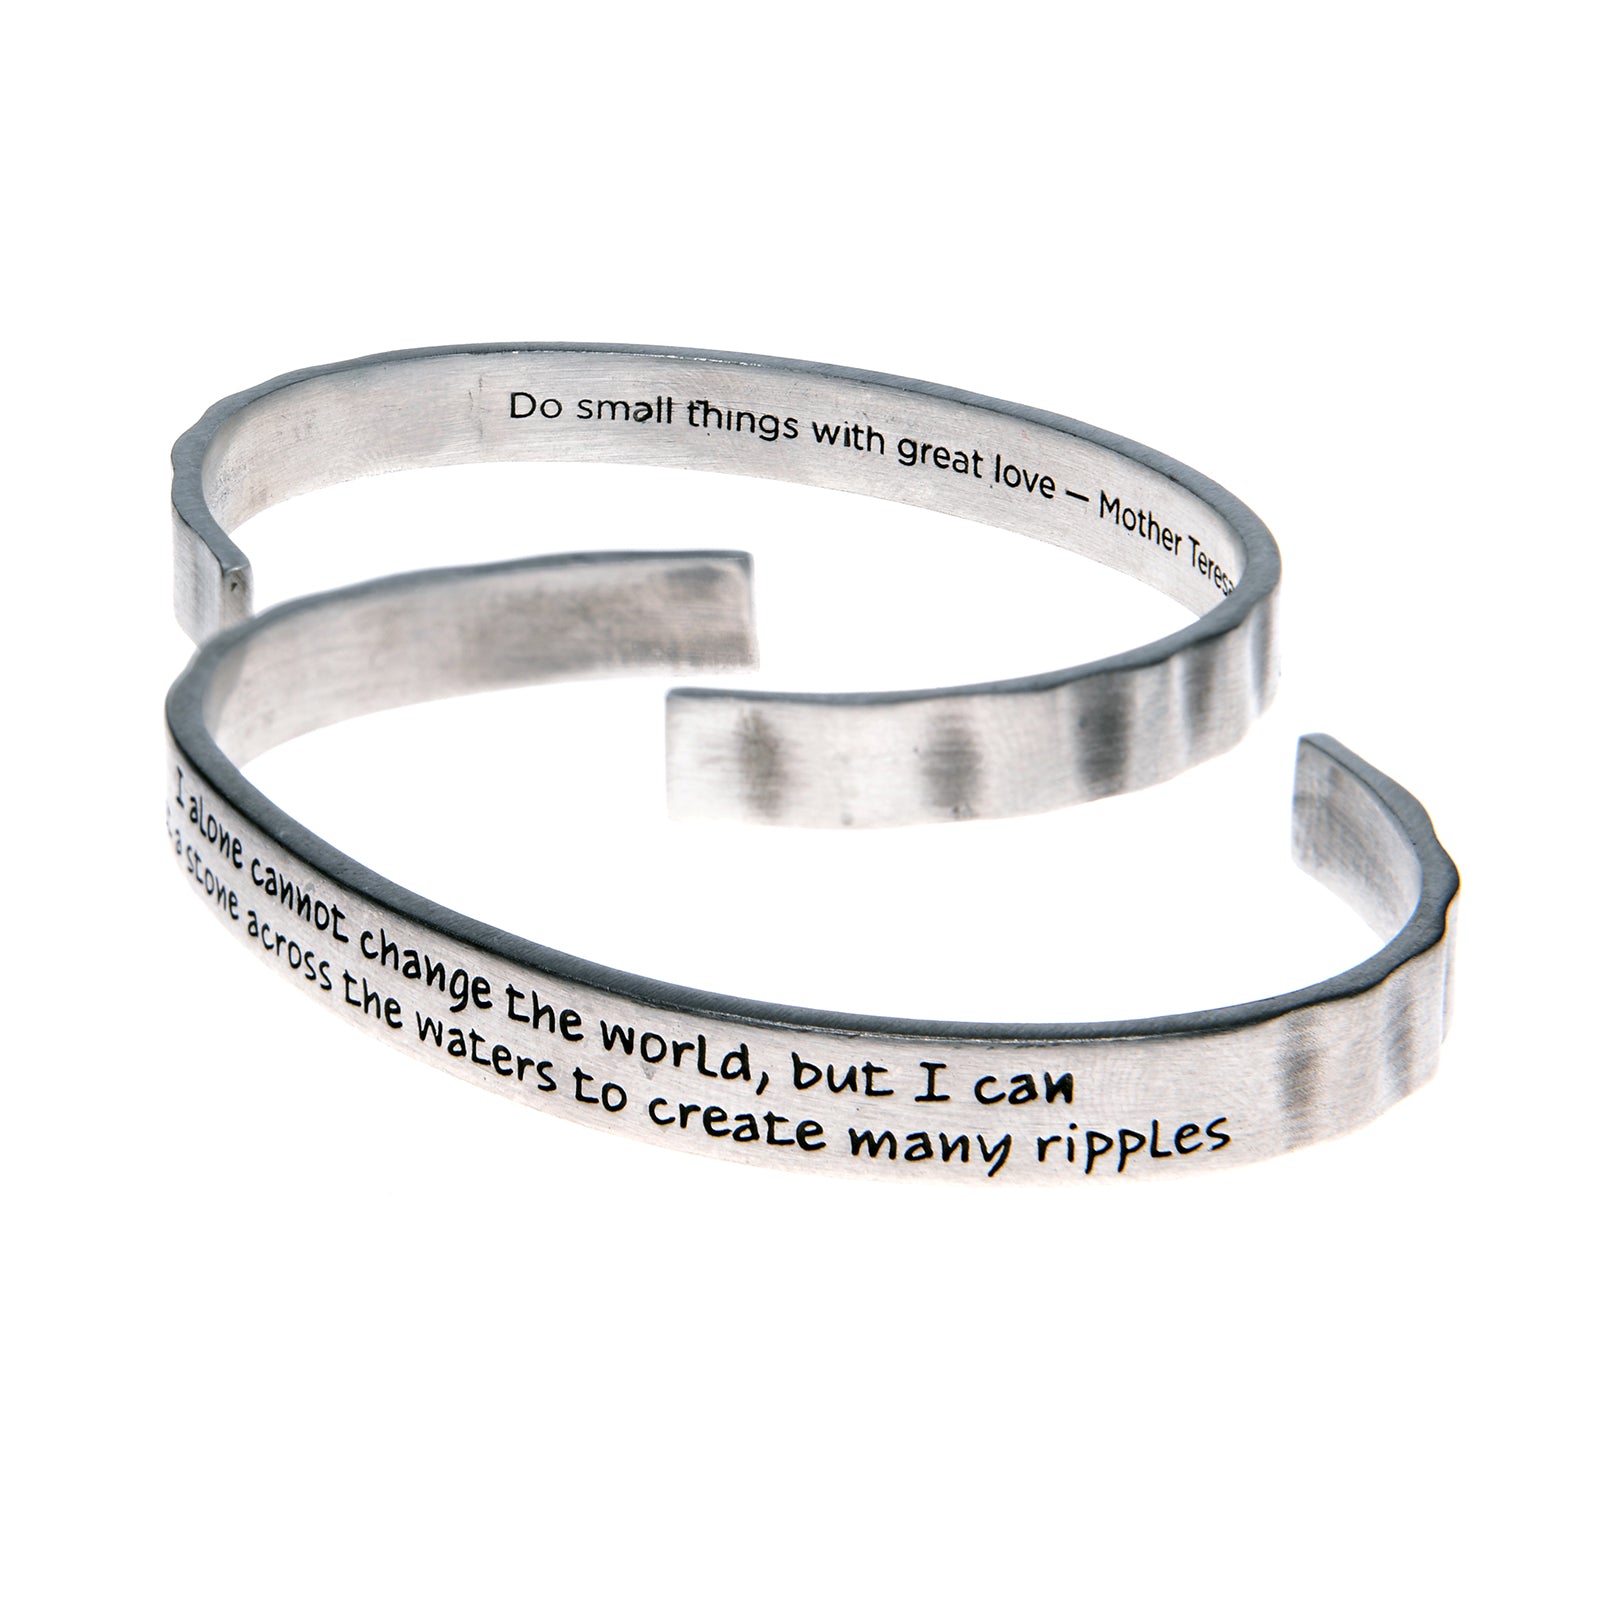 I Alone Cannot Change the World Quotable Cuff Bracelet - Mother Teresa